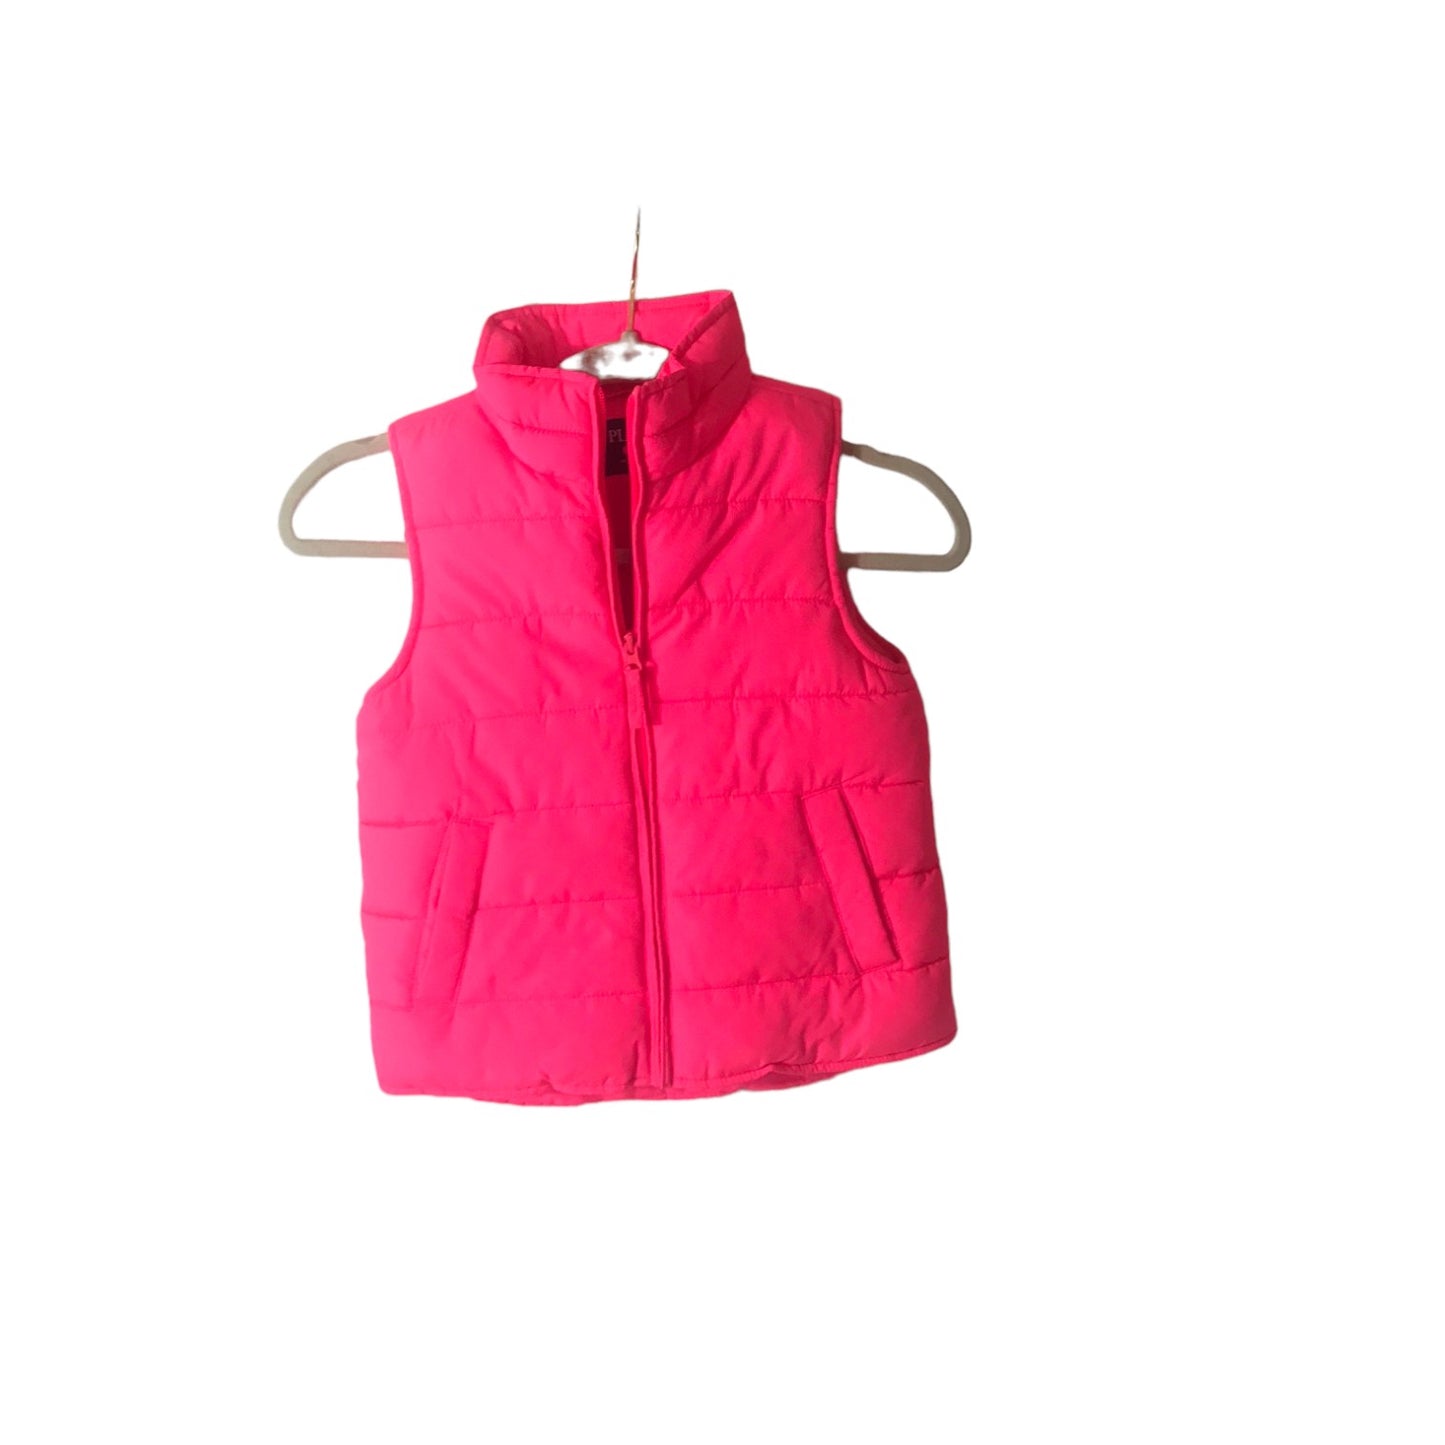 Place Girls Puffer Vest Hot Pink Size M (7-8)